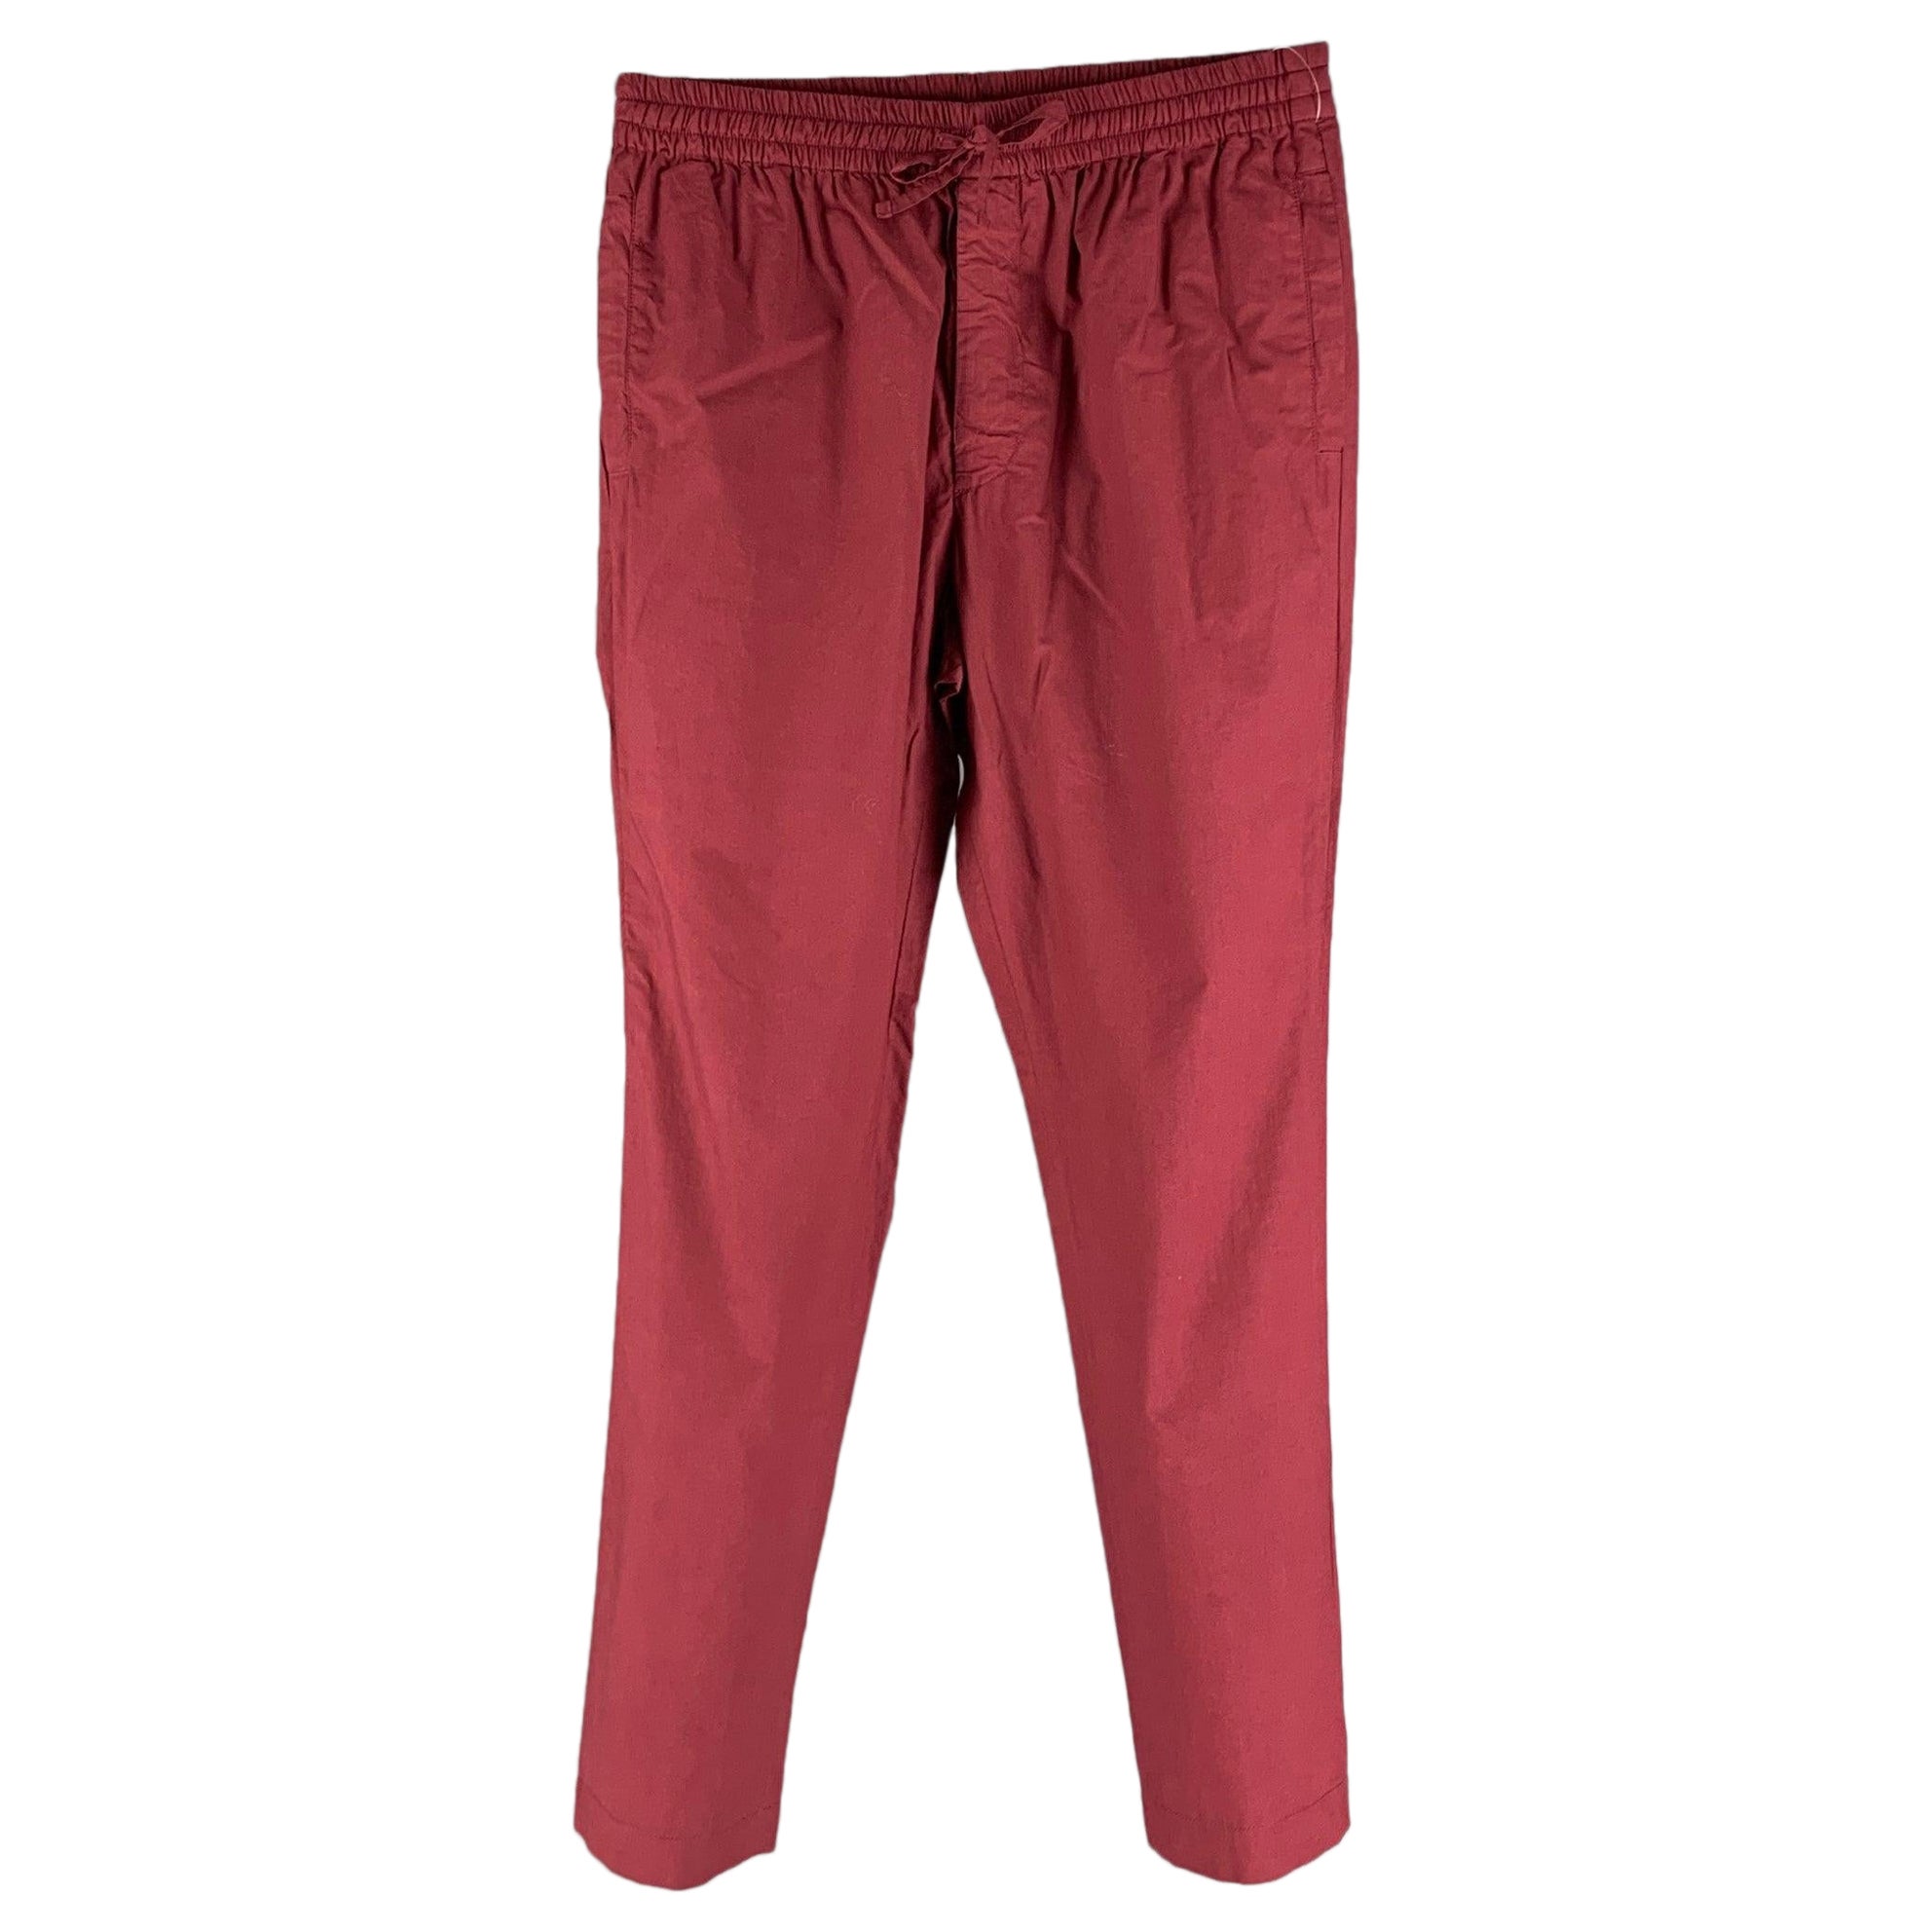 TOMAS MAIER Size M Burgundy Solid Cotton Elastic Waistband Casual Pants For Sale